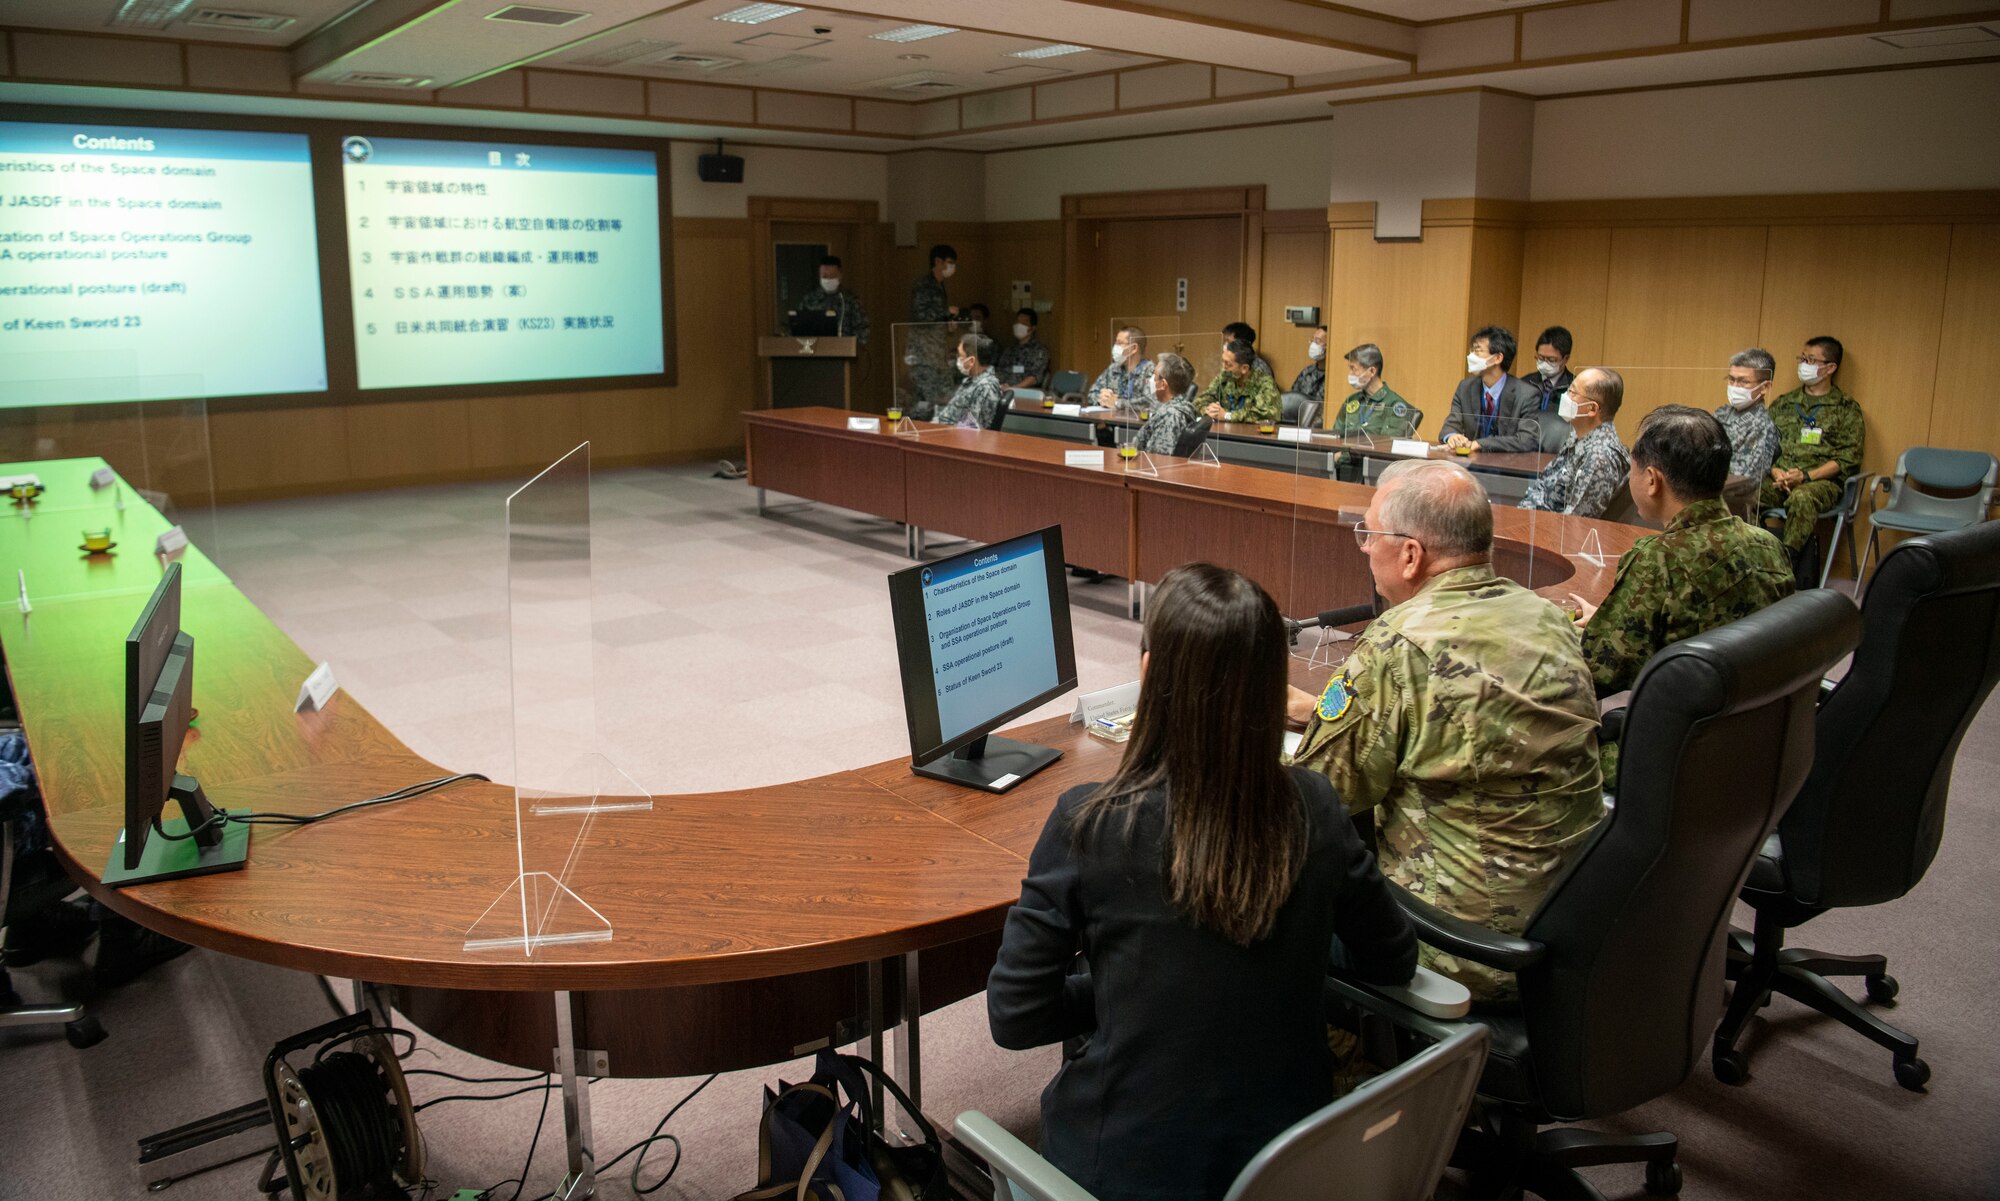 U.S. Air Force Lt. Gen. Ricky Rupp, commander of United States Forces Japan and Fifth Air Force, and GEN Yamazaki Koji, chief of staff for the Japan Joint Staff, receive a Space Operations Center brief during exercise Keen Sword 23 at Fuchu Air Base, Japan, Nov. 17, 2022.